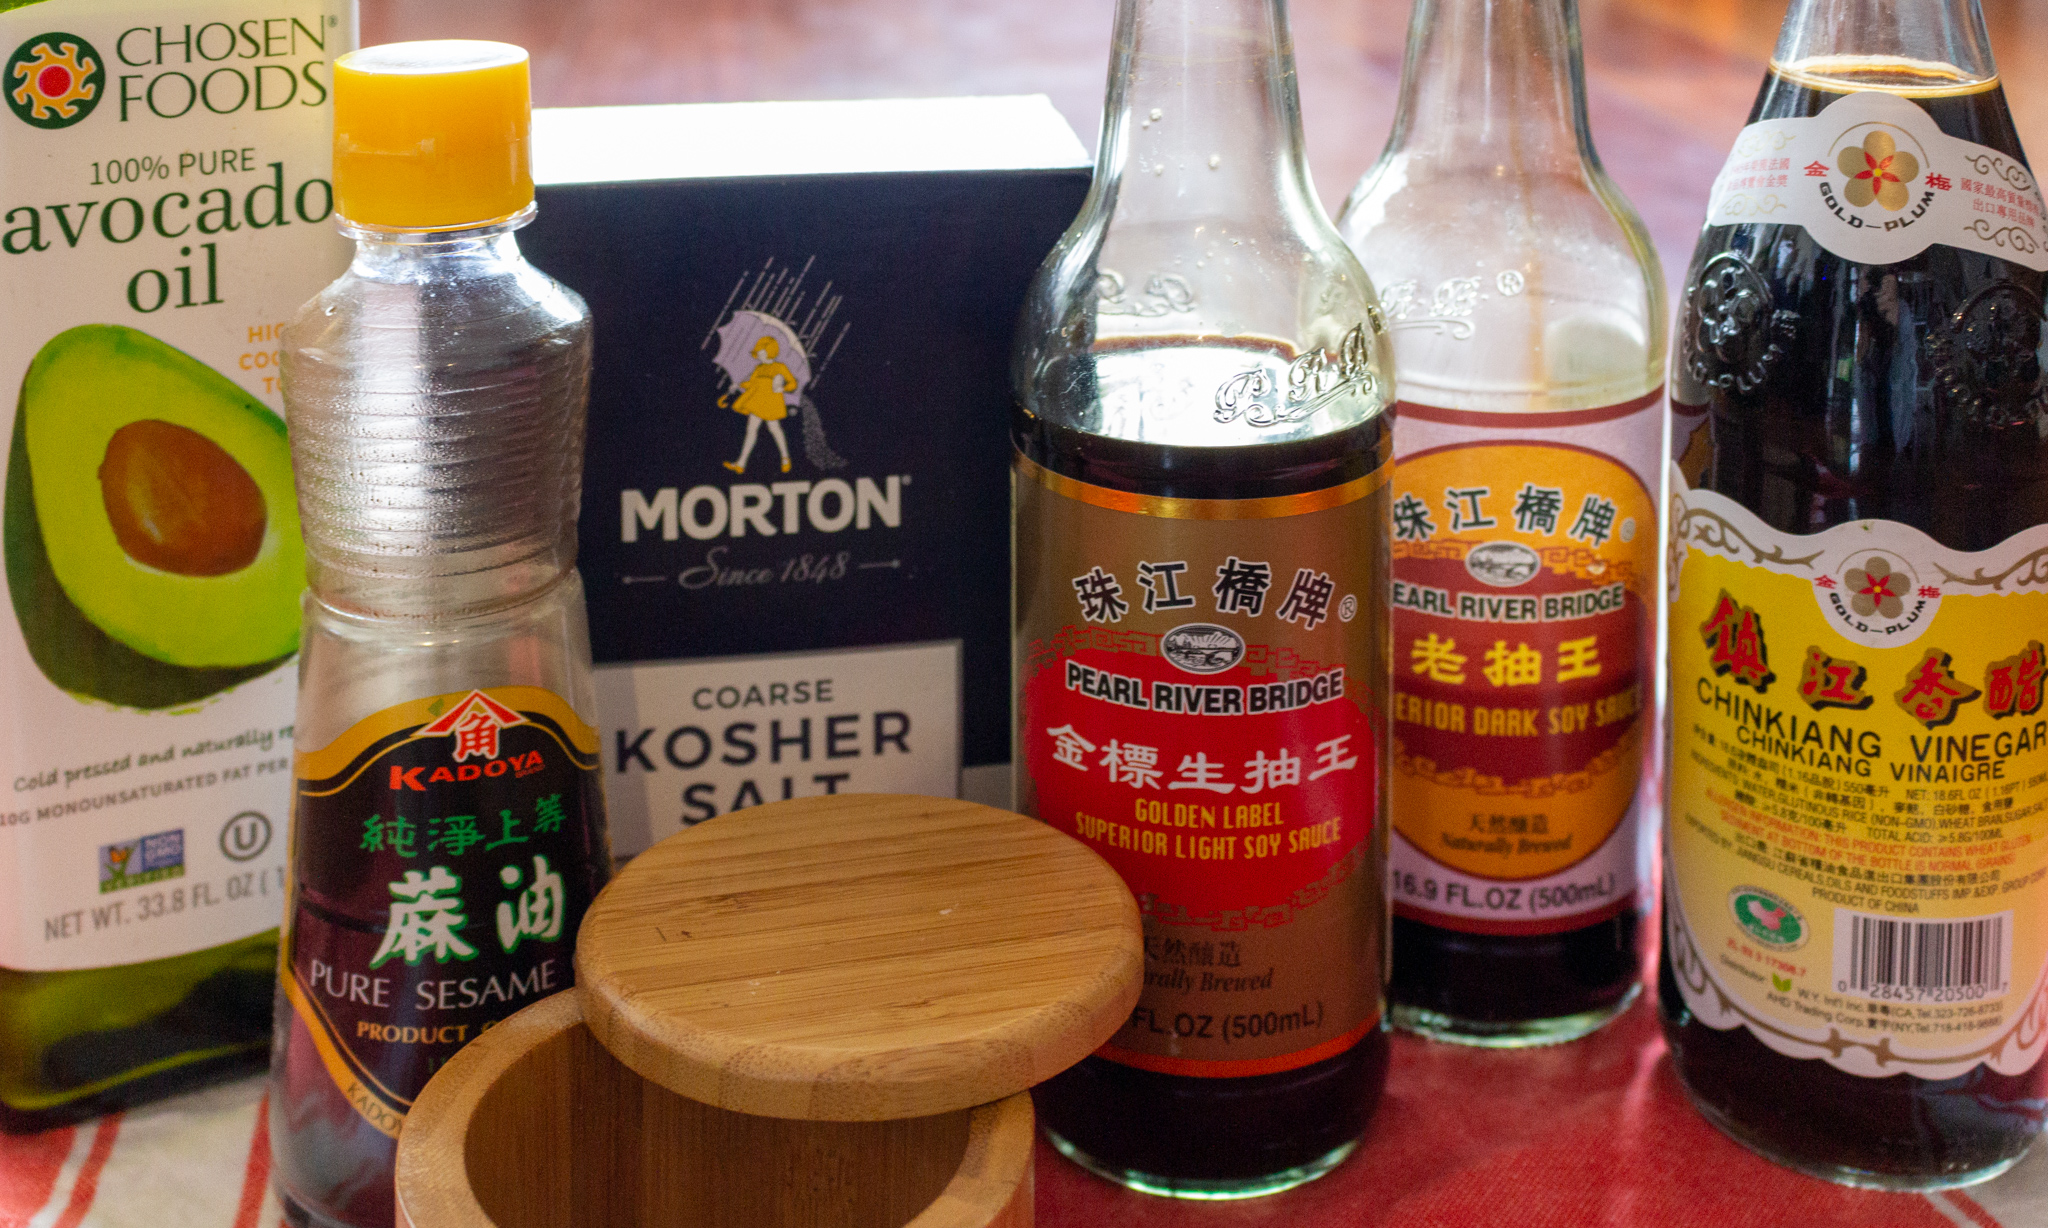 oil, salt, soy, vinegar 油盐酱醋, the basic ingredients for Chinese cooking